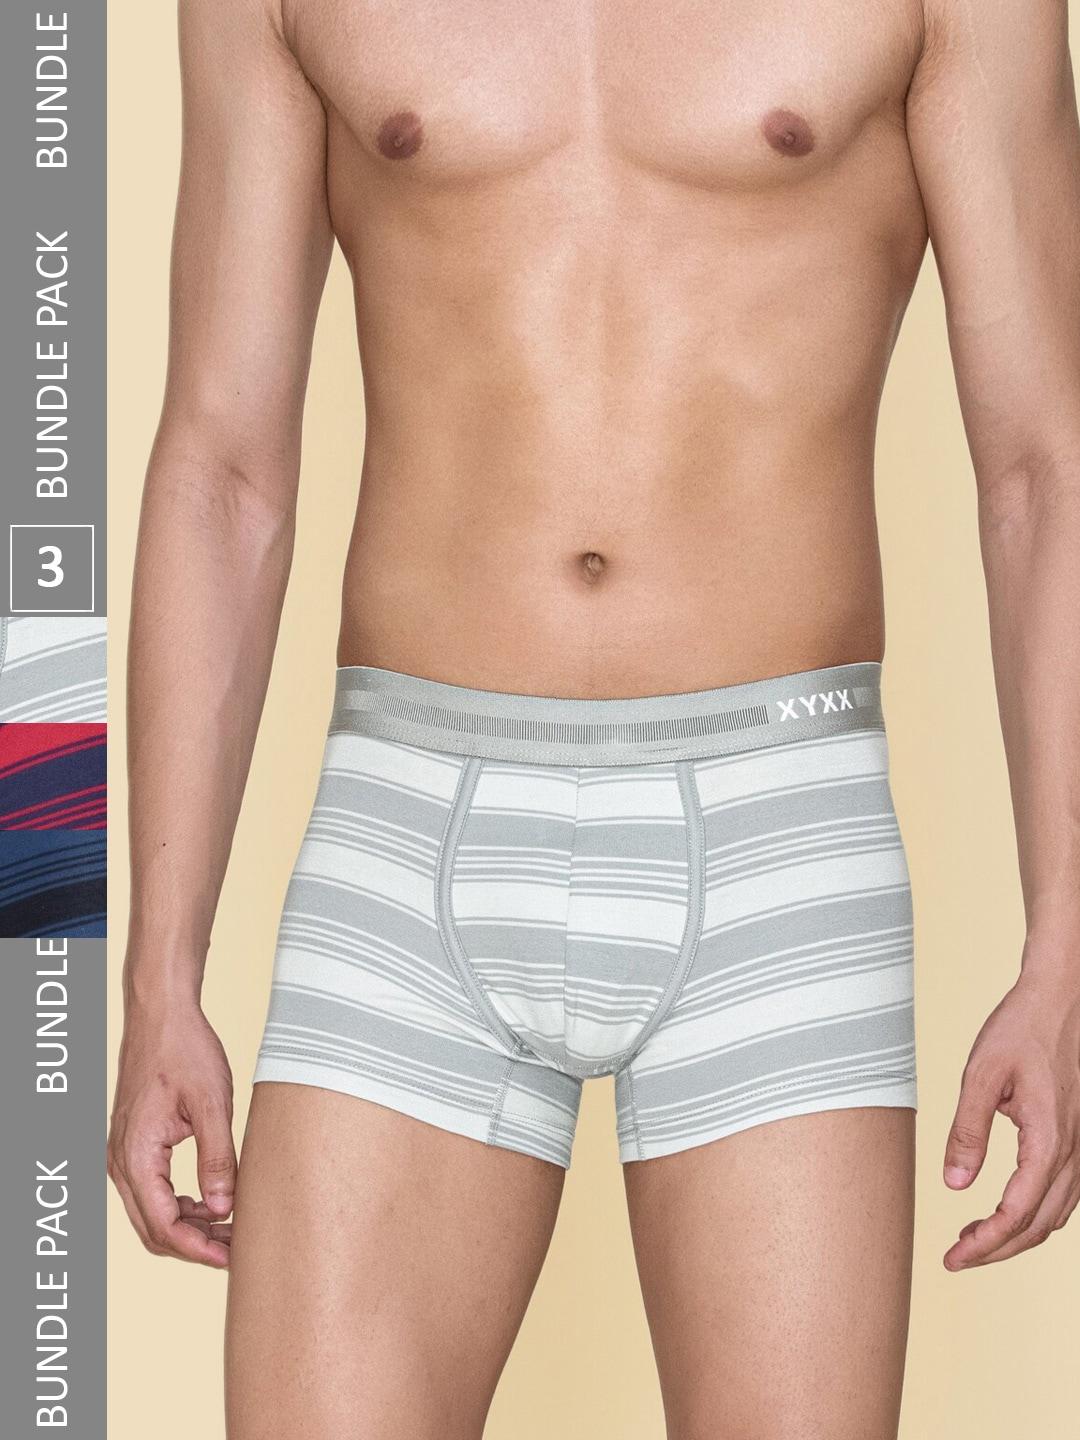 XYXX Pack Of 3 Striped Cotton Mid-RiseTrunks XYTRNK3PCKN842